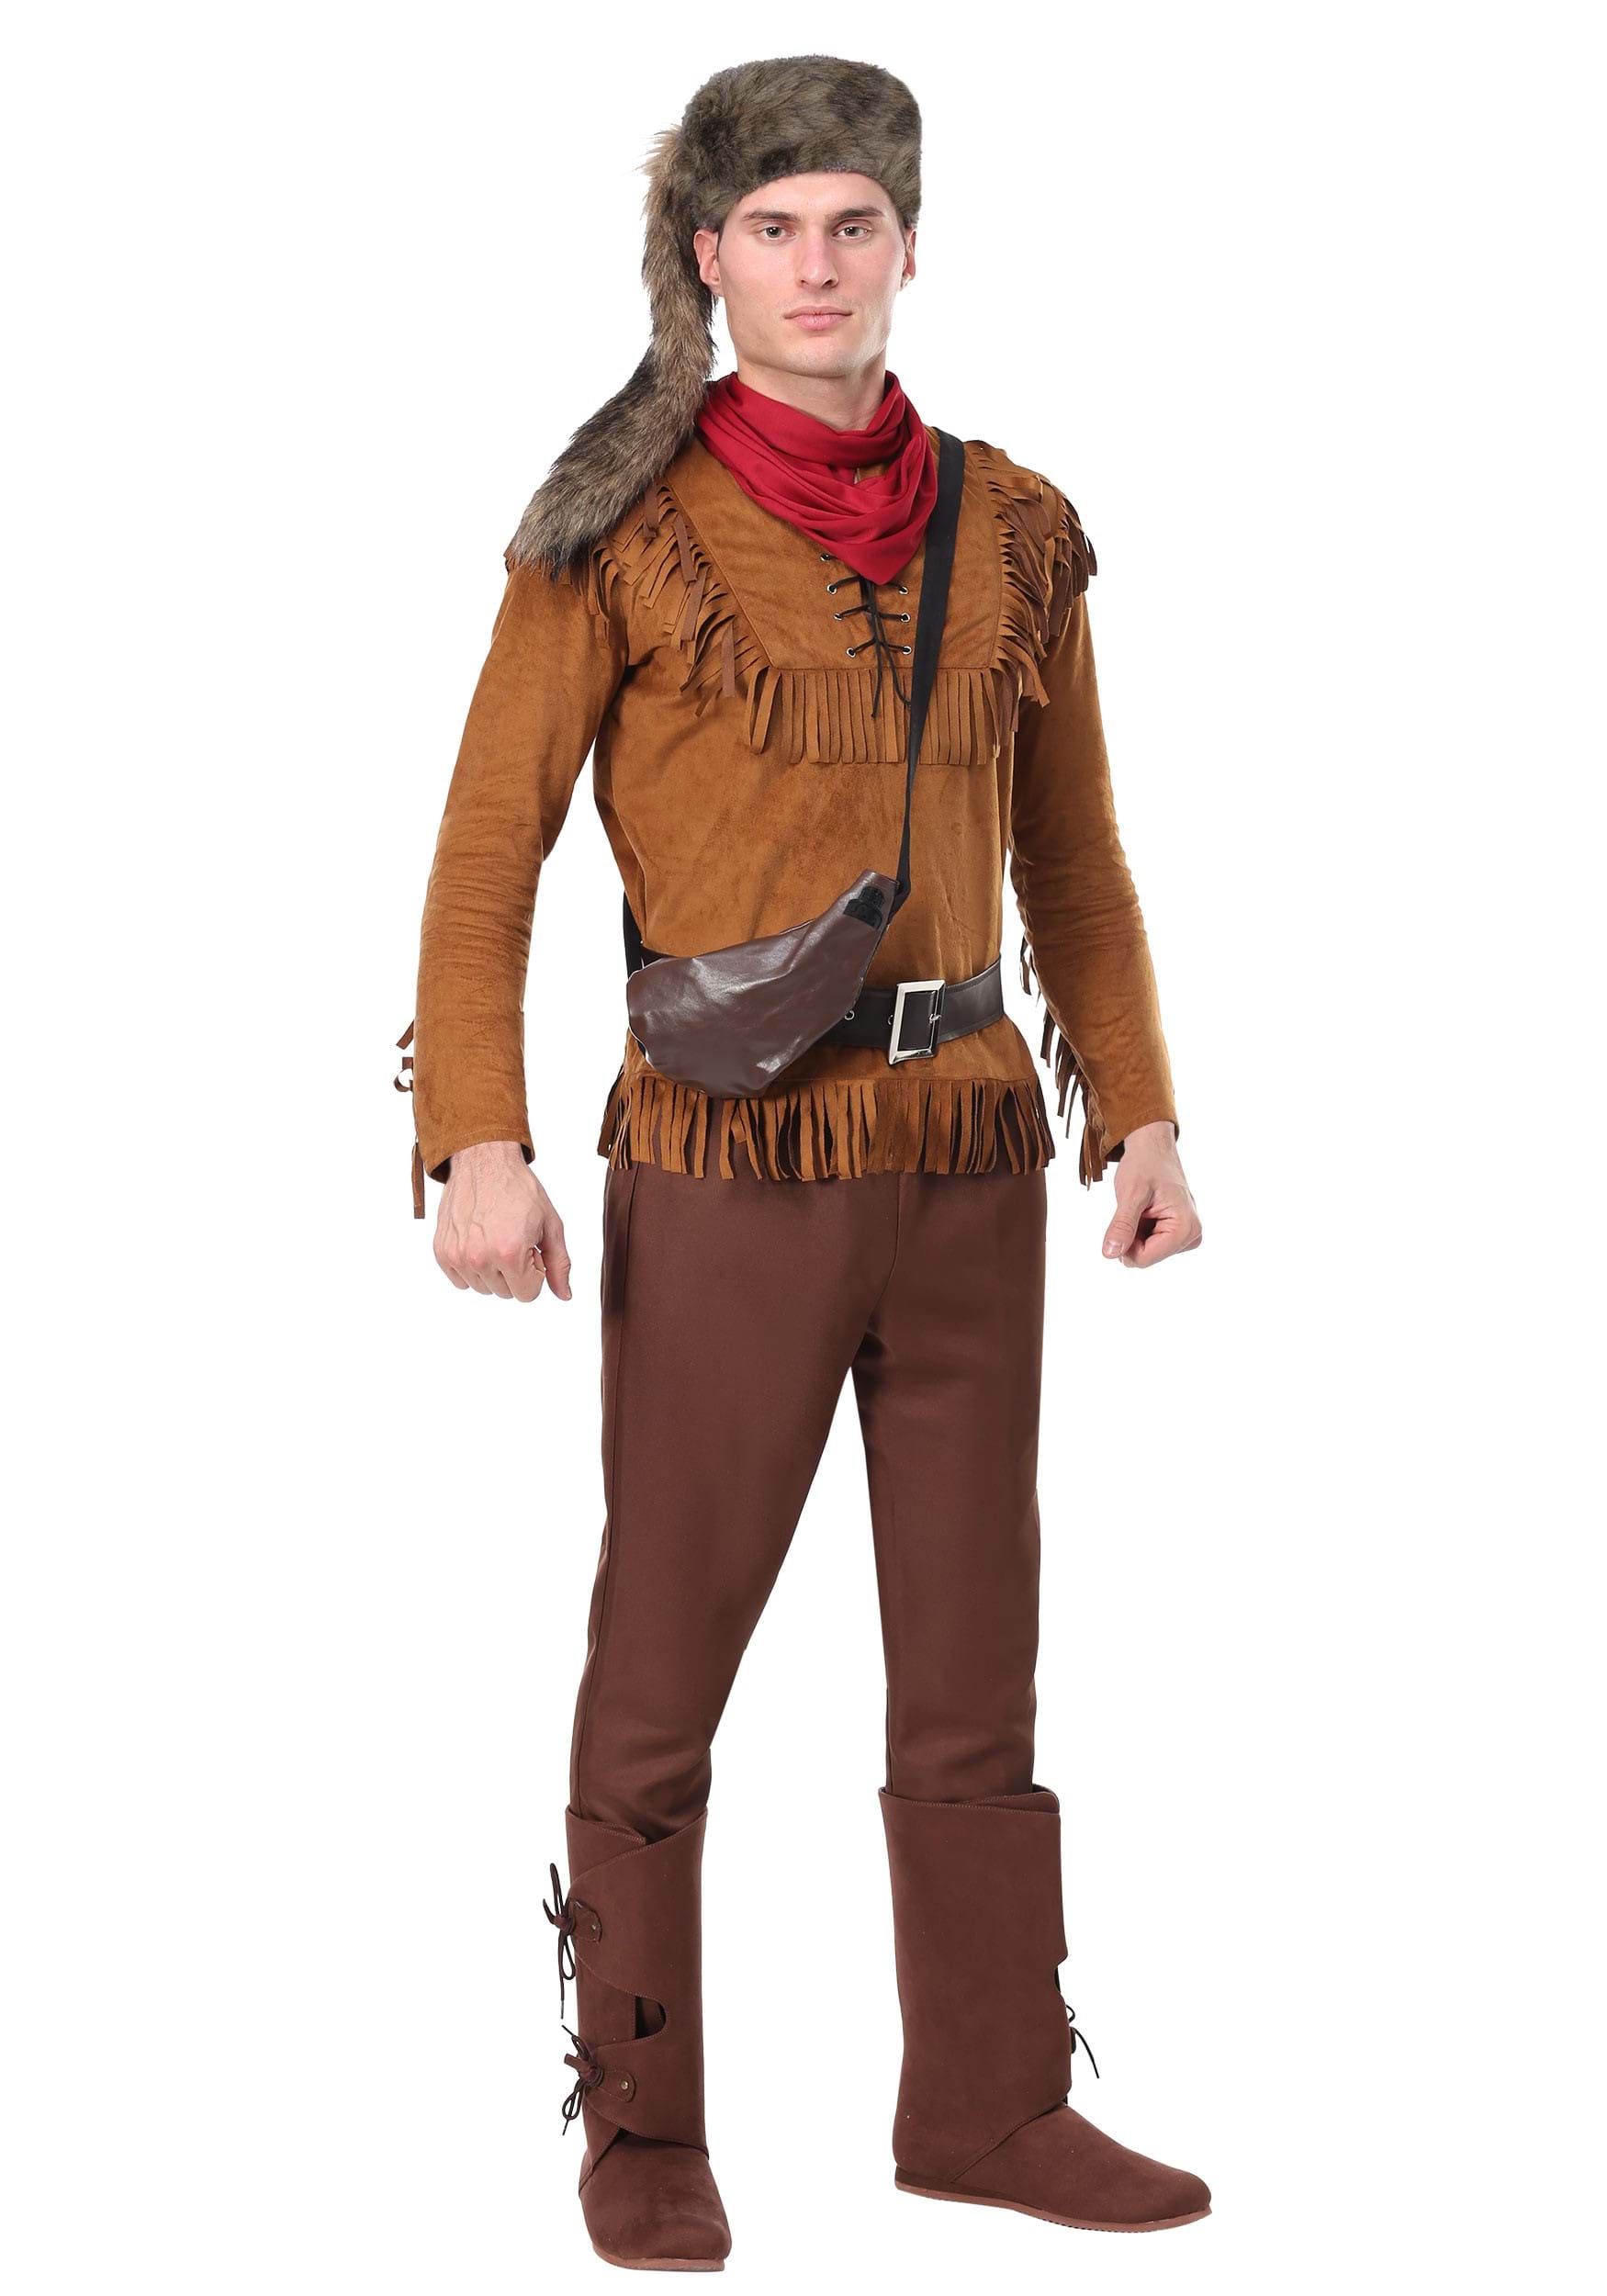 Photos - Fancy Dress FUN Costumes Davy Crockett Costume for Adults Yellow/Red FUN6778AD